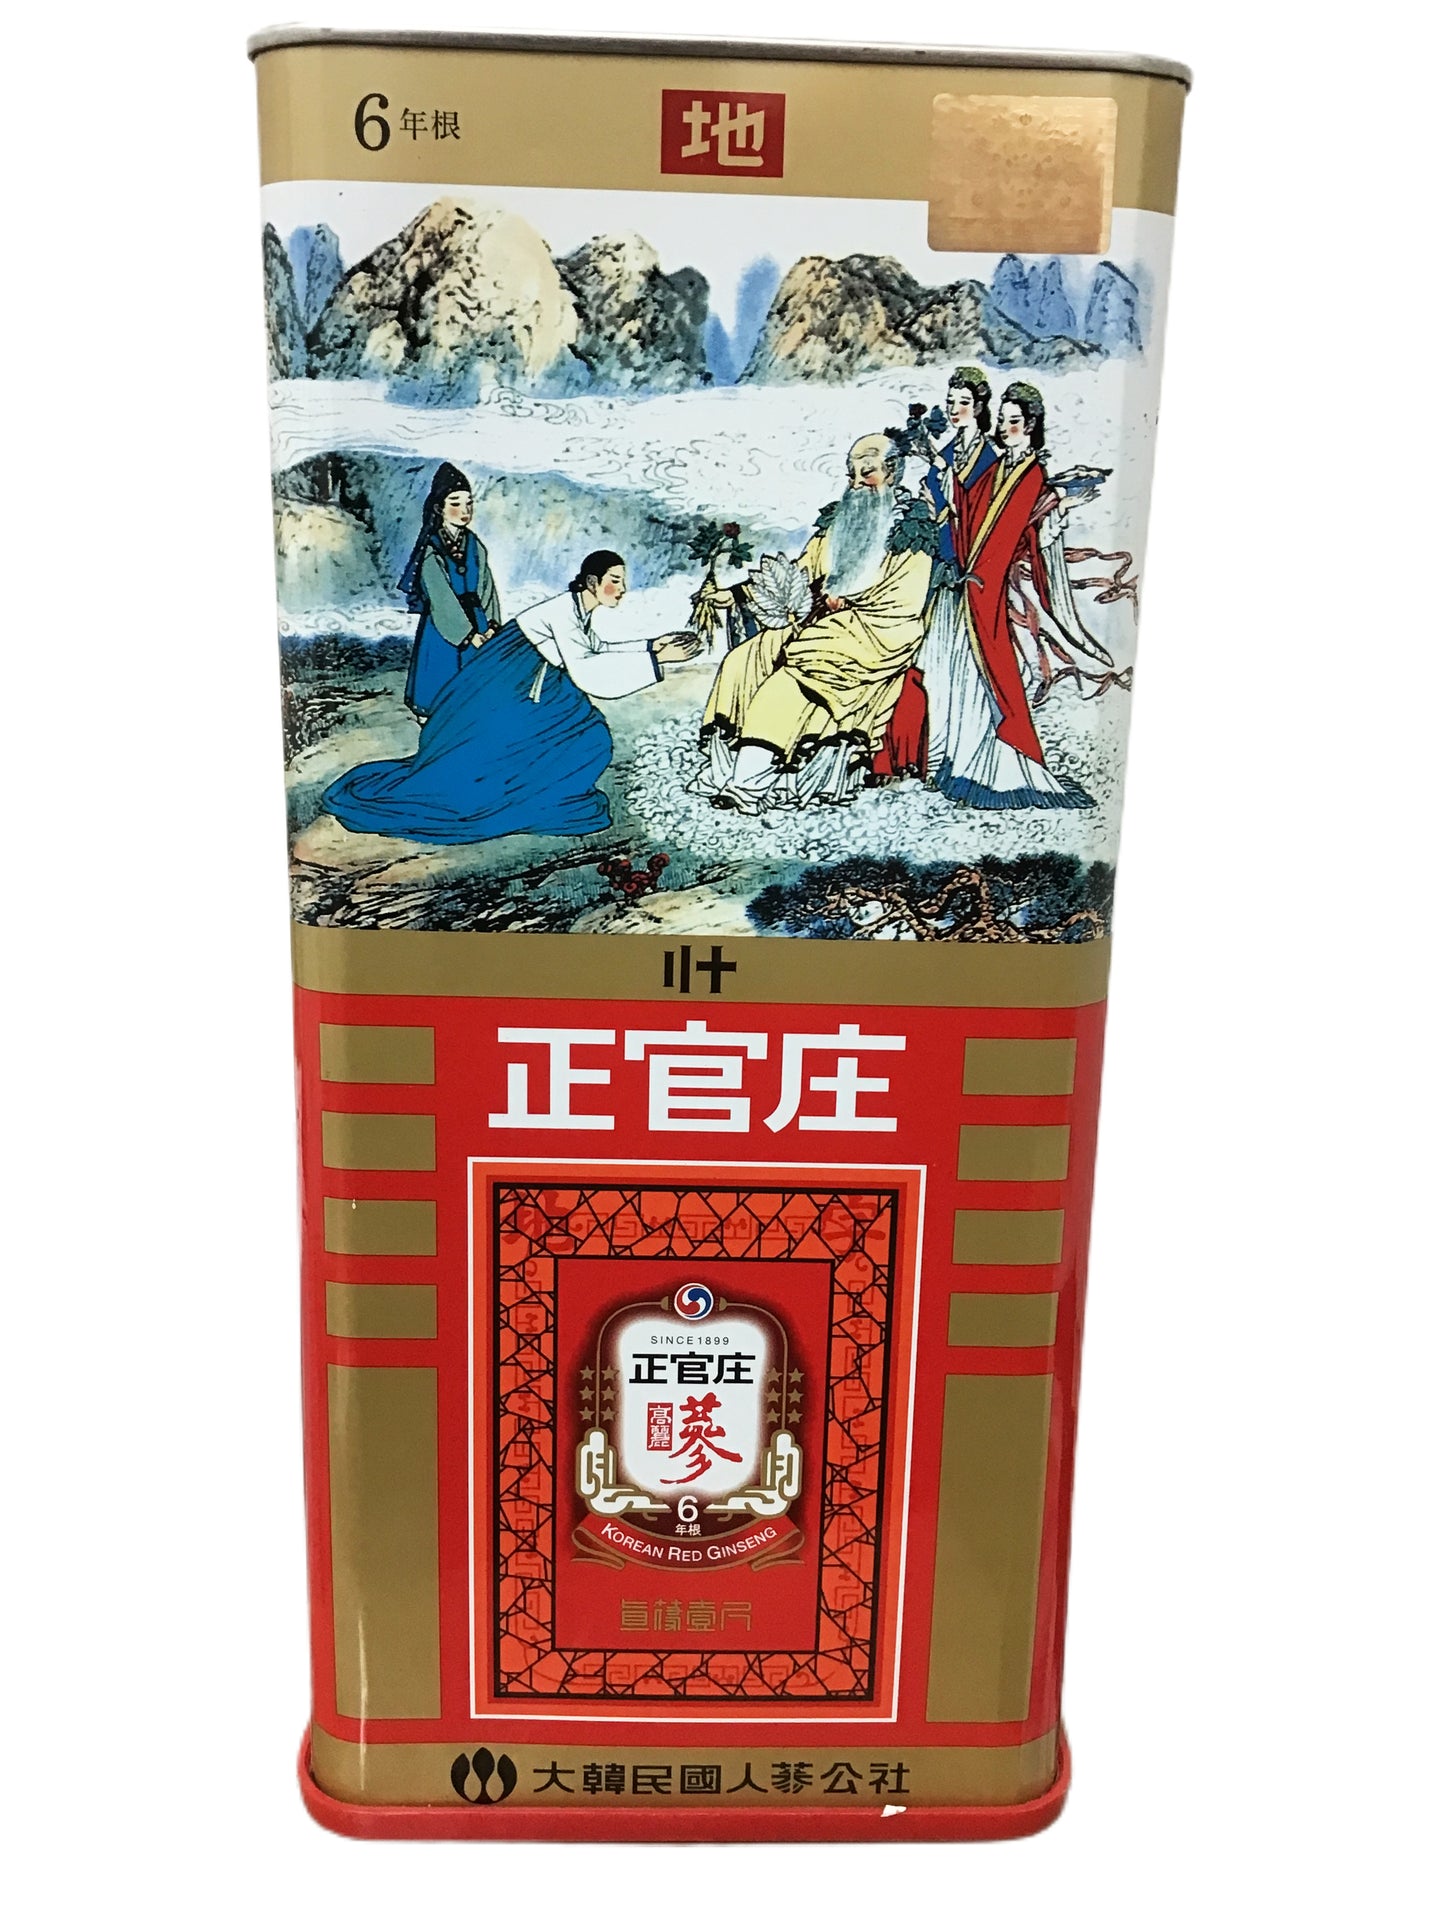 CHEONG KWAN JANG 6yr Old Korean Red Ginseng Earth Grade Canned 600g 20 Roots 正官庄 高丽参切参